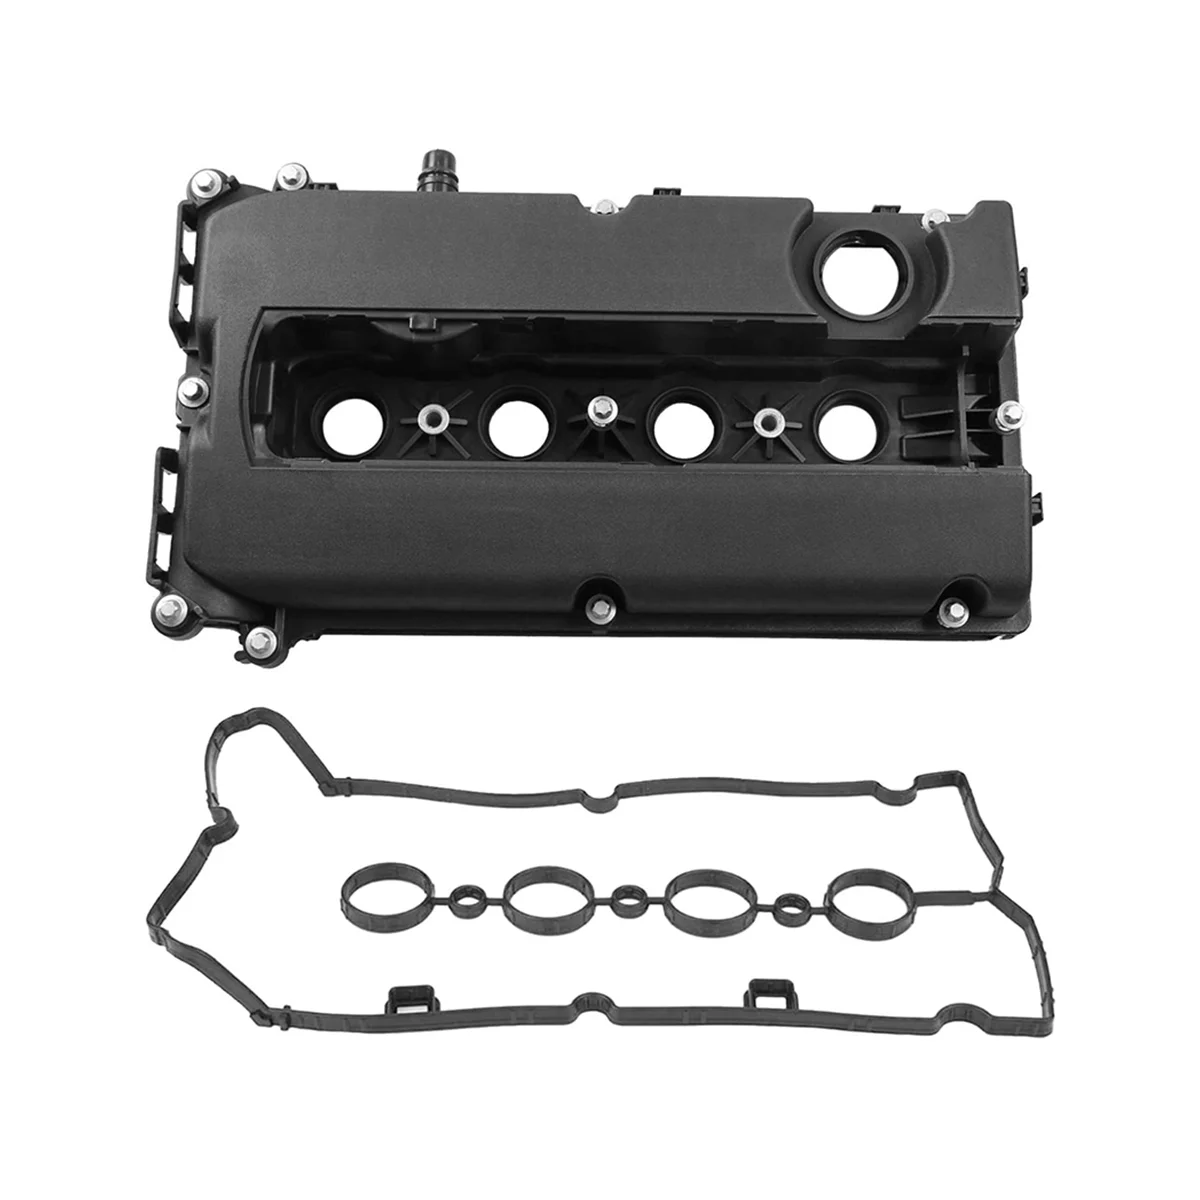 

Engine Camshaft Rocker Valve Cover with Gasket for Chevy Cruze Sonic Aveo 1.6L 1.8L 2009-2015 55564395 55558673